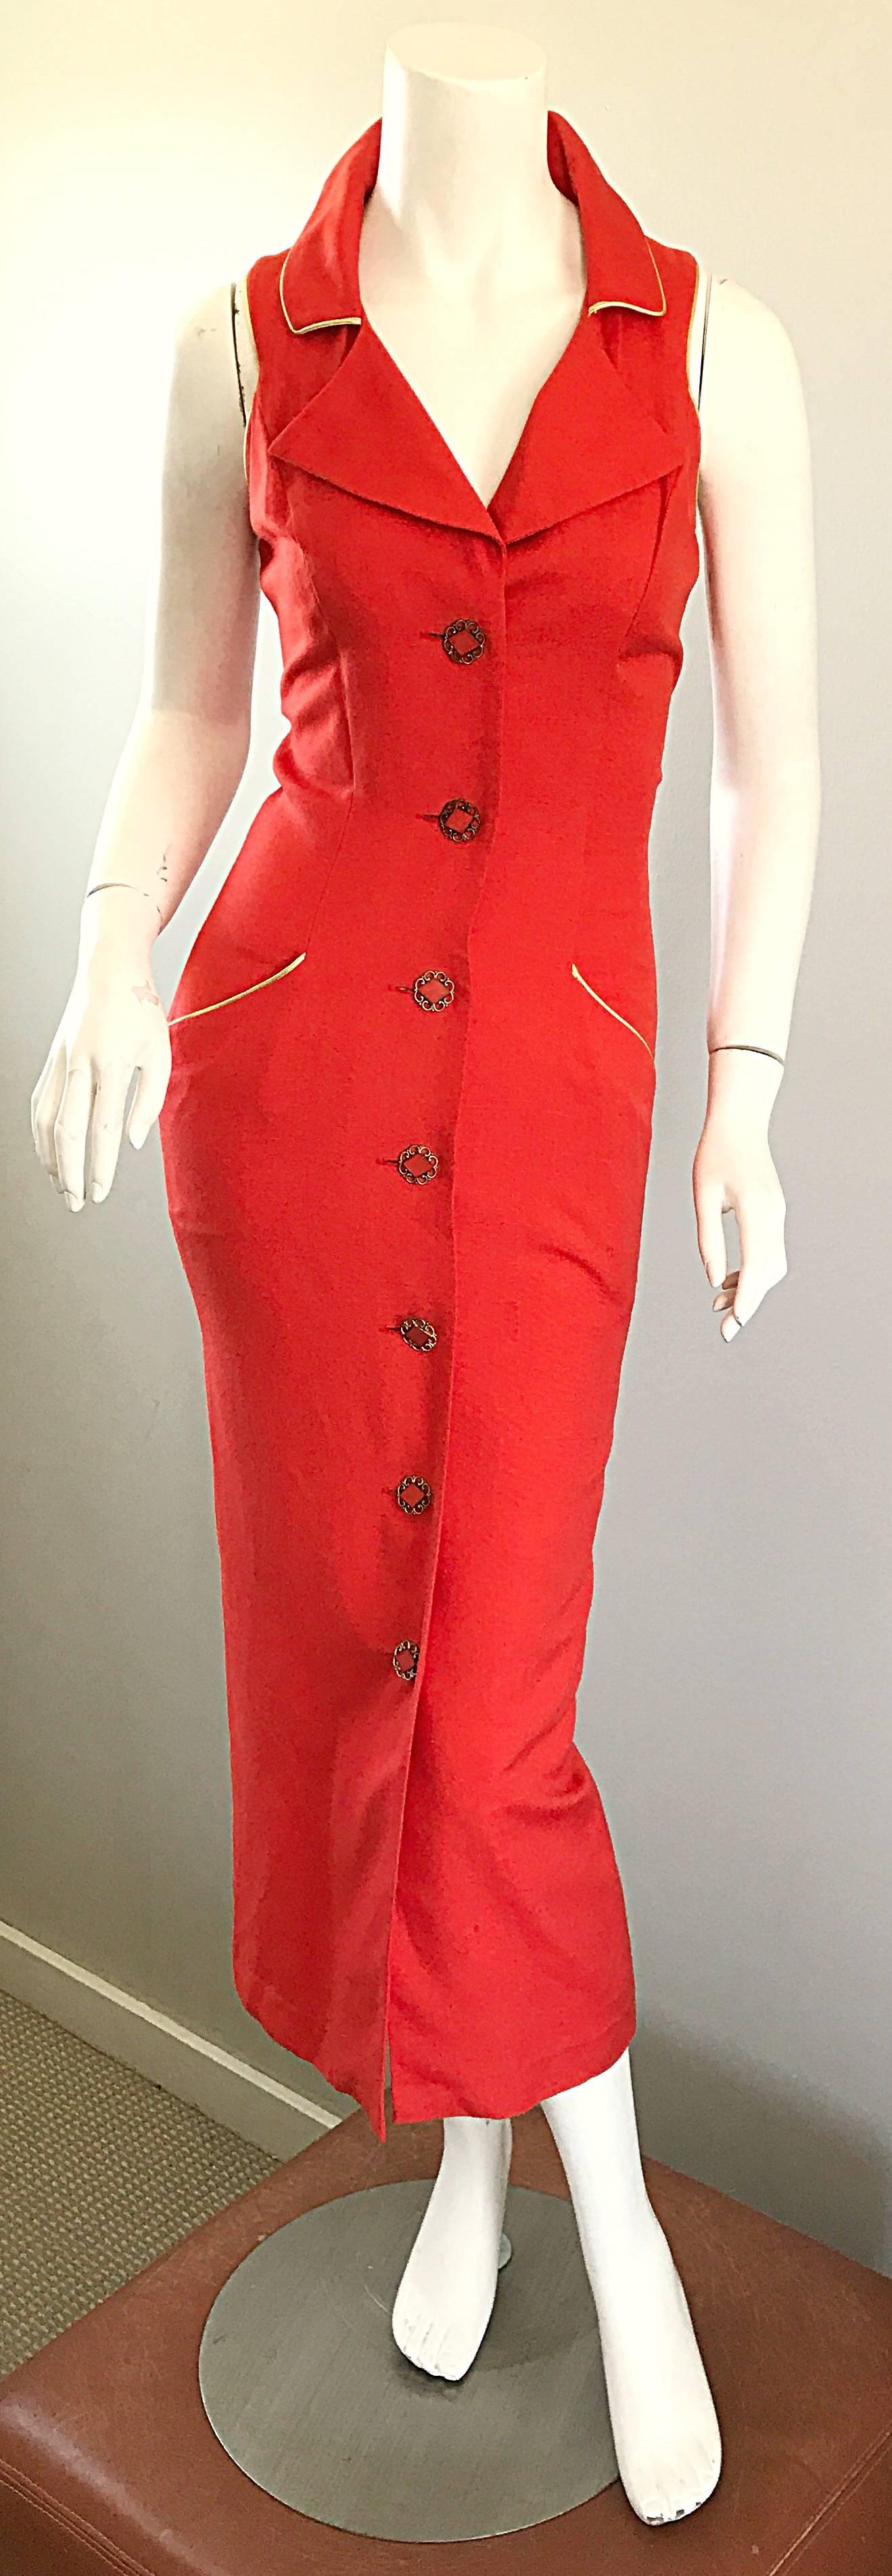 Chic Italian vintage FIORENCI burnt orange and gold 90s does 50s vintage wiggle dress! Soft cotton and linen blend. Chic beaded buttons up the front. Pockets at each side of the hips. Wonderful flattering fit in a beautiful vibrant orange color.